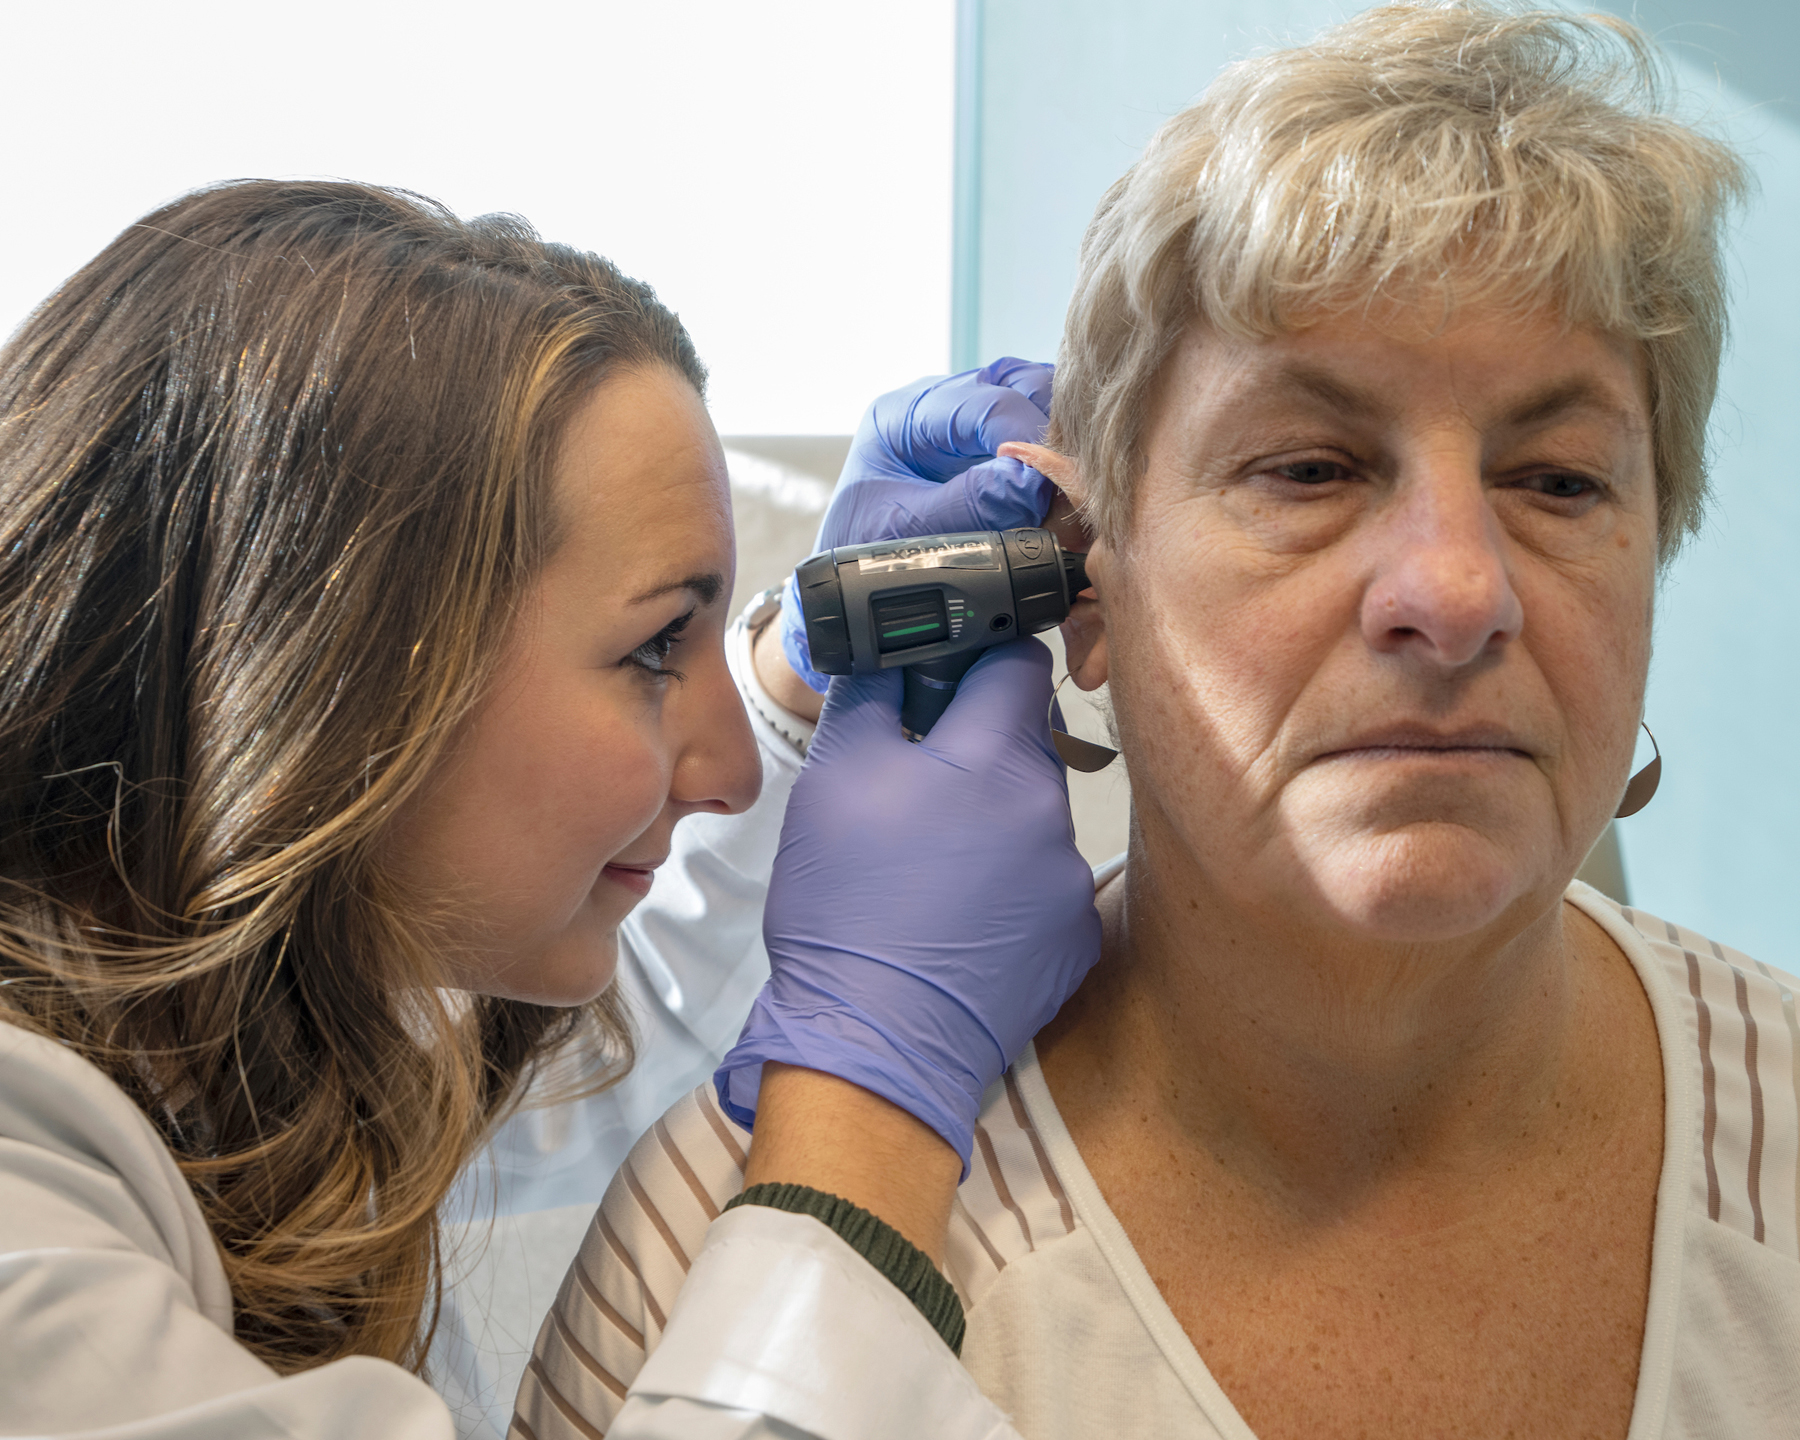 Physician assistant student examining a patient's ear